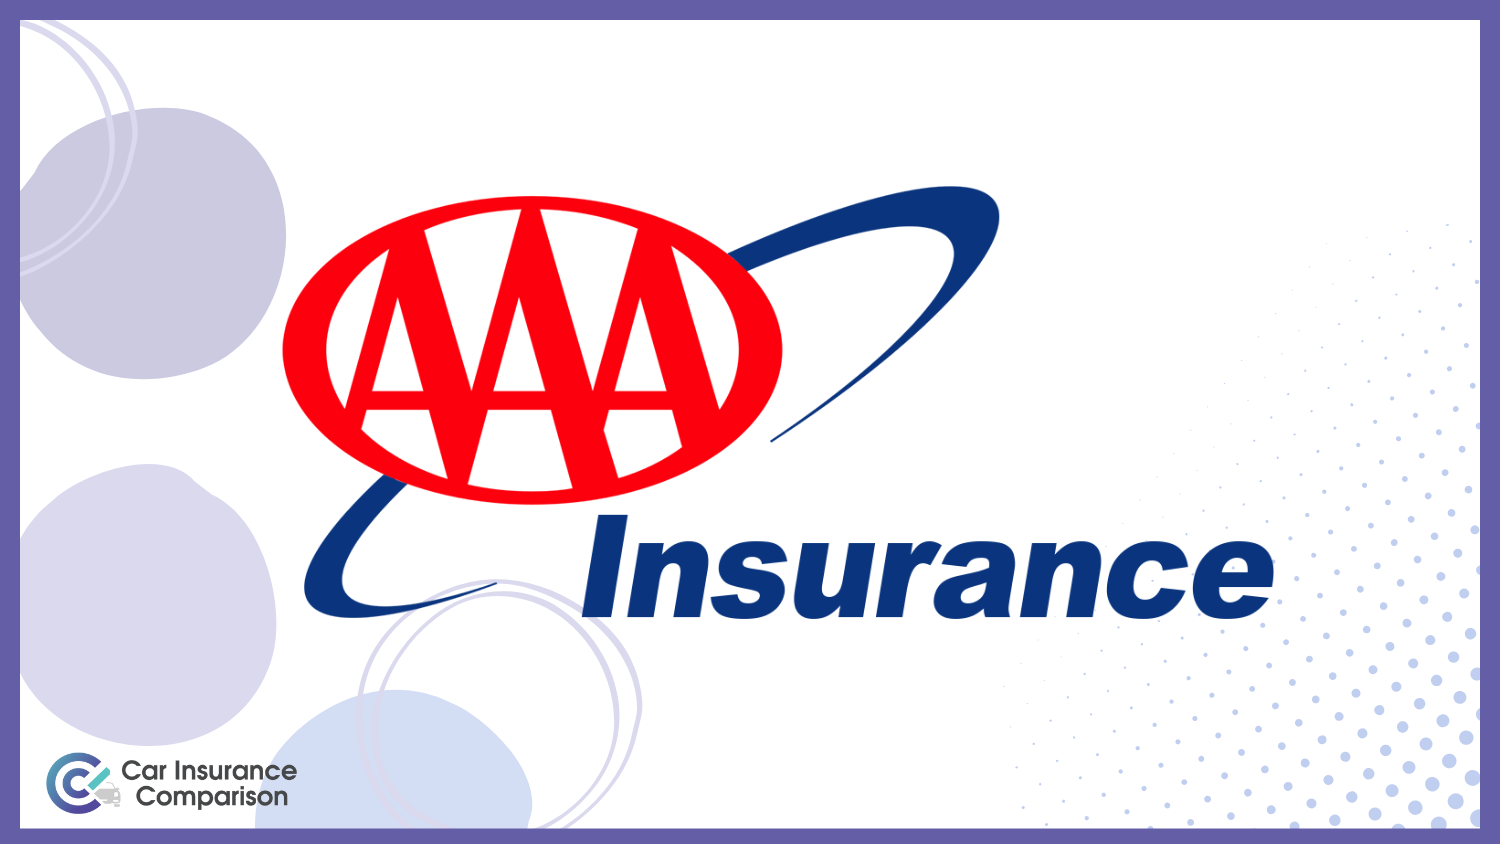 AAA: Best Car Insurance Companies for High-Risk Drivers